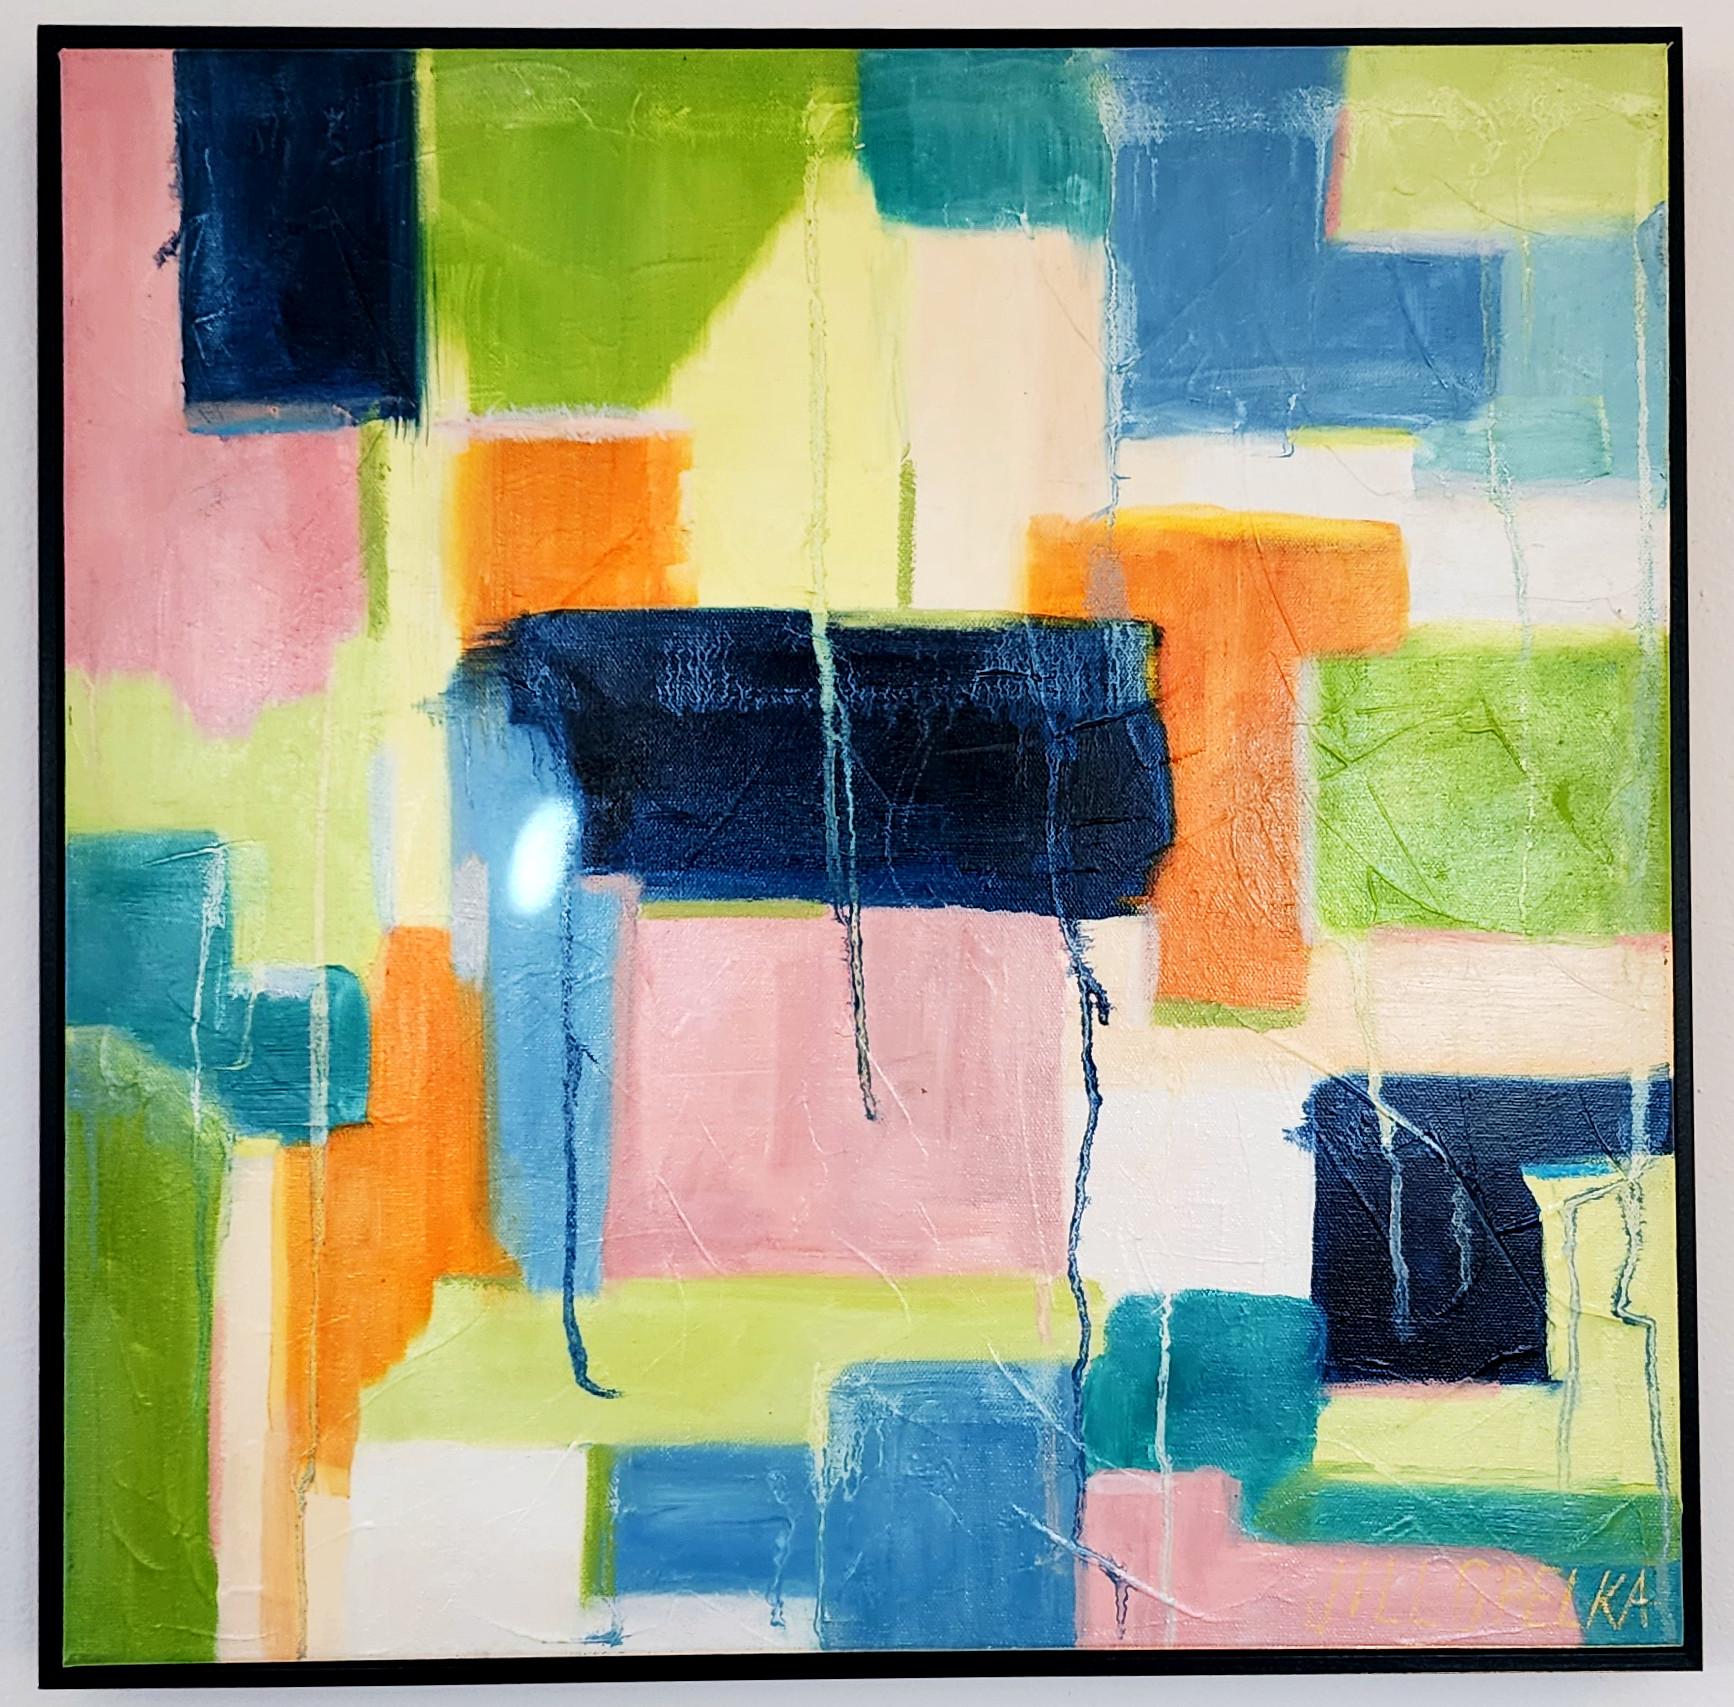 Abstract III (Abstract, Vibrant, Deep, Blue, Navy, Green, Orange, 30% OFF) - Modern Painting by Jill Opelka